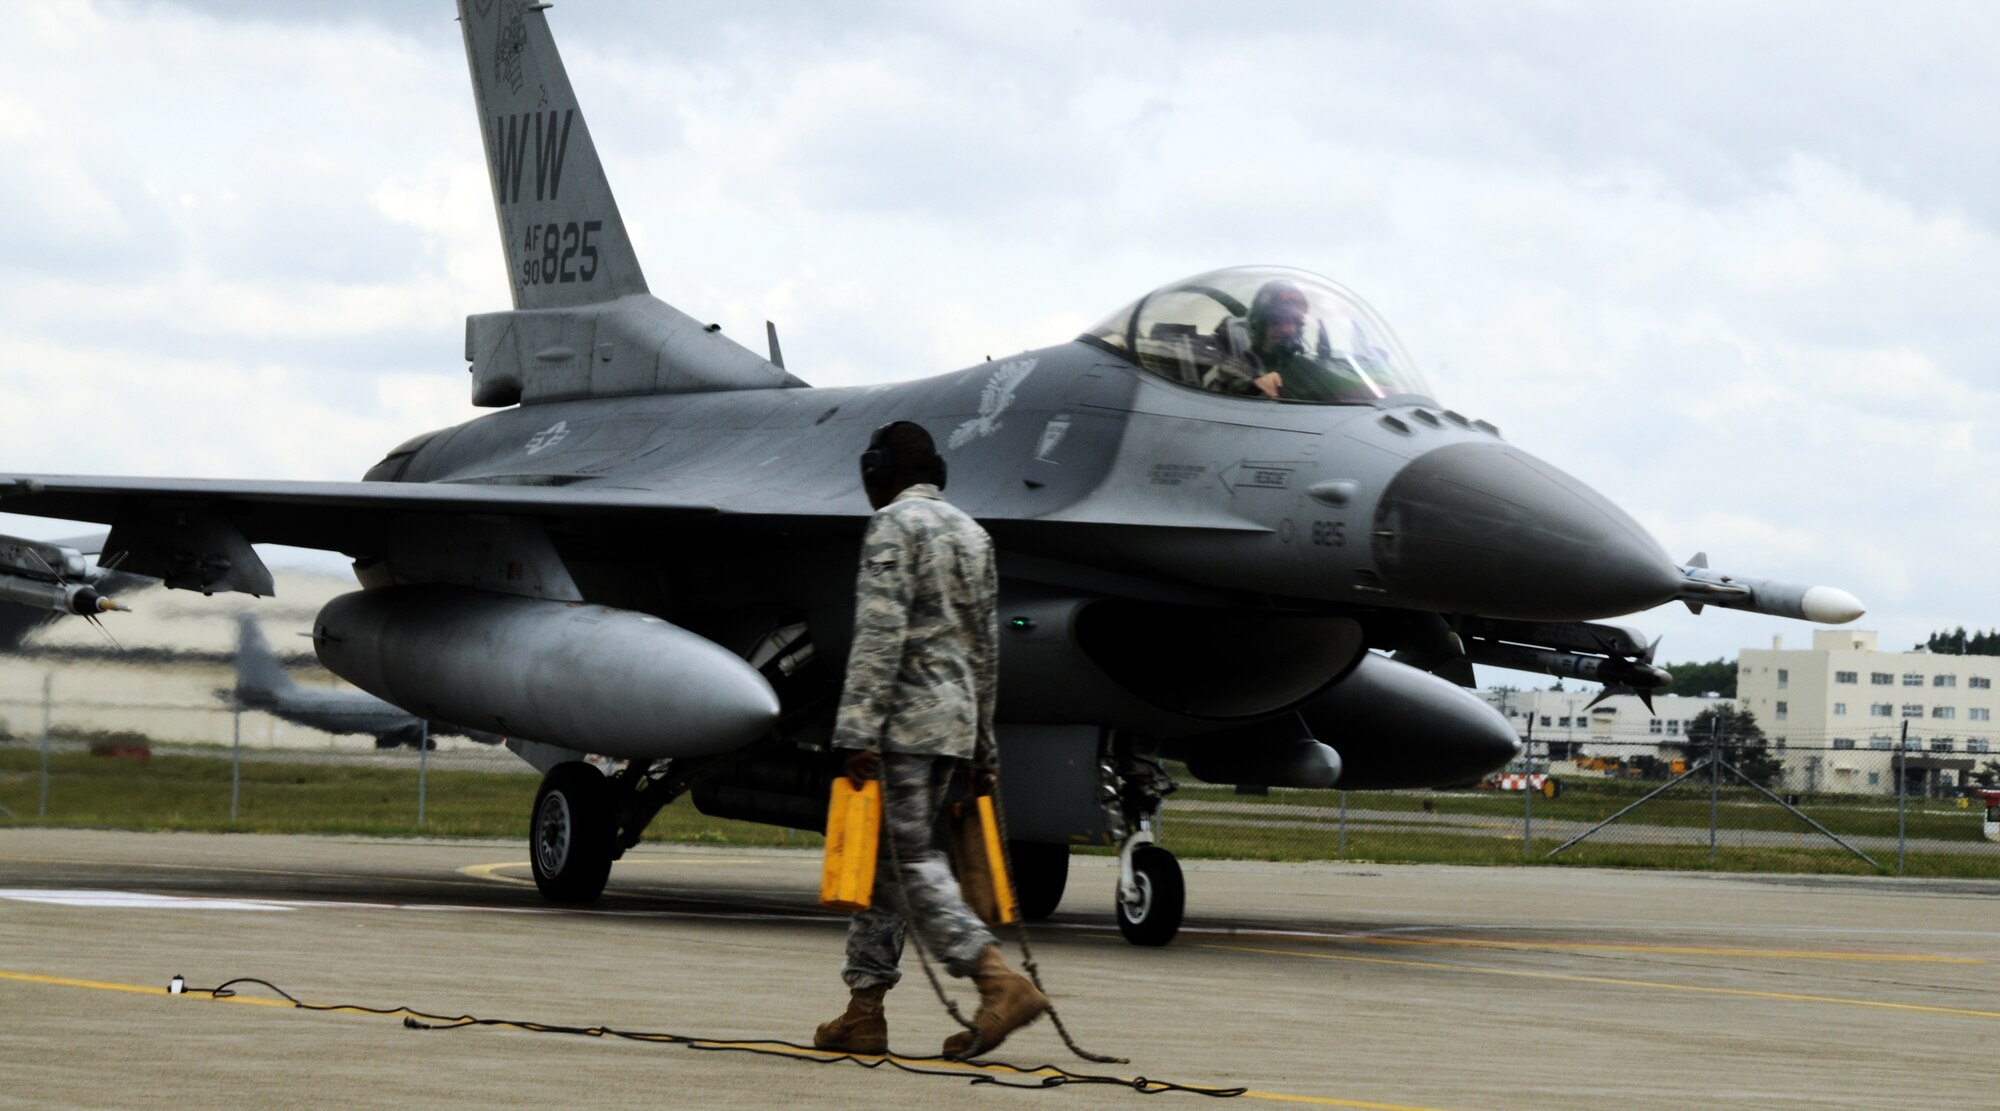 MISAWA AIR BASE, Japan -- A 14th Fighter Squadron F-16 Fighting Falcon taxis in after completing a mission June 1, 2009. The 14th FS has spent the last three months rebuilding skill sets in their primary mission of air-to-air and suppression of enemy air defenses. (U.S. Air Force photo by Senior Airman Jamal D. Sutter)